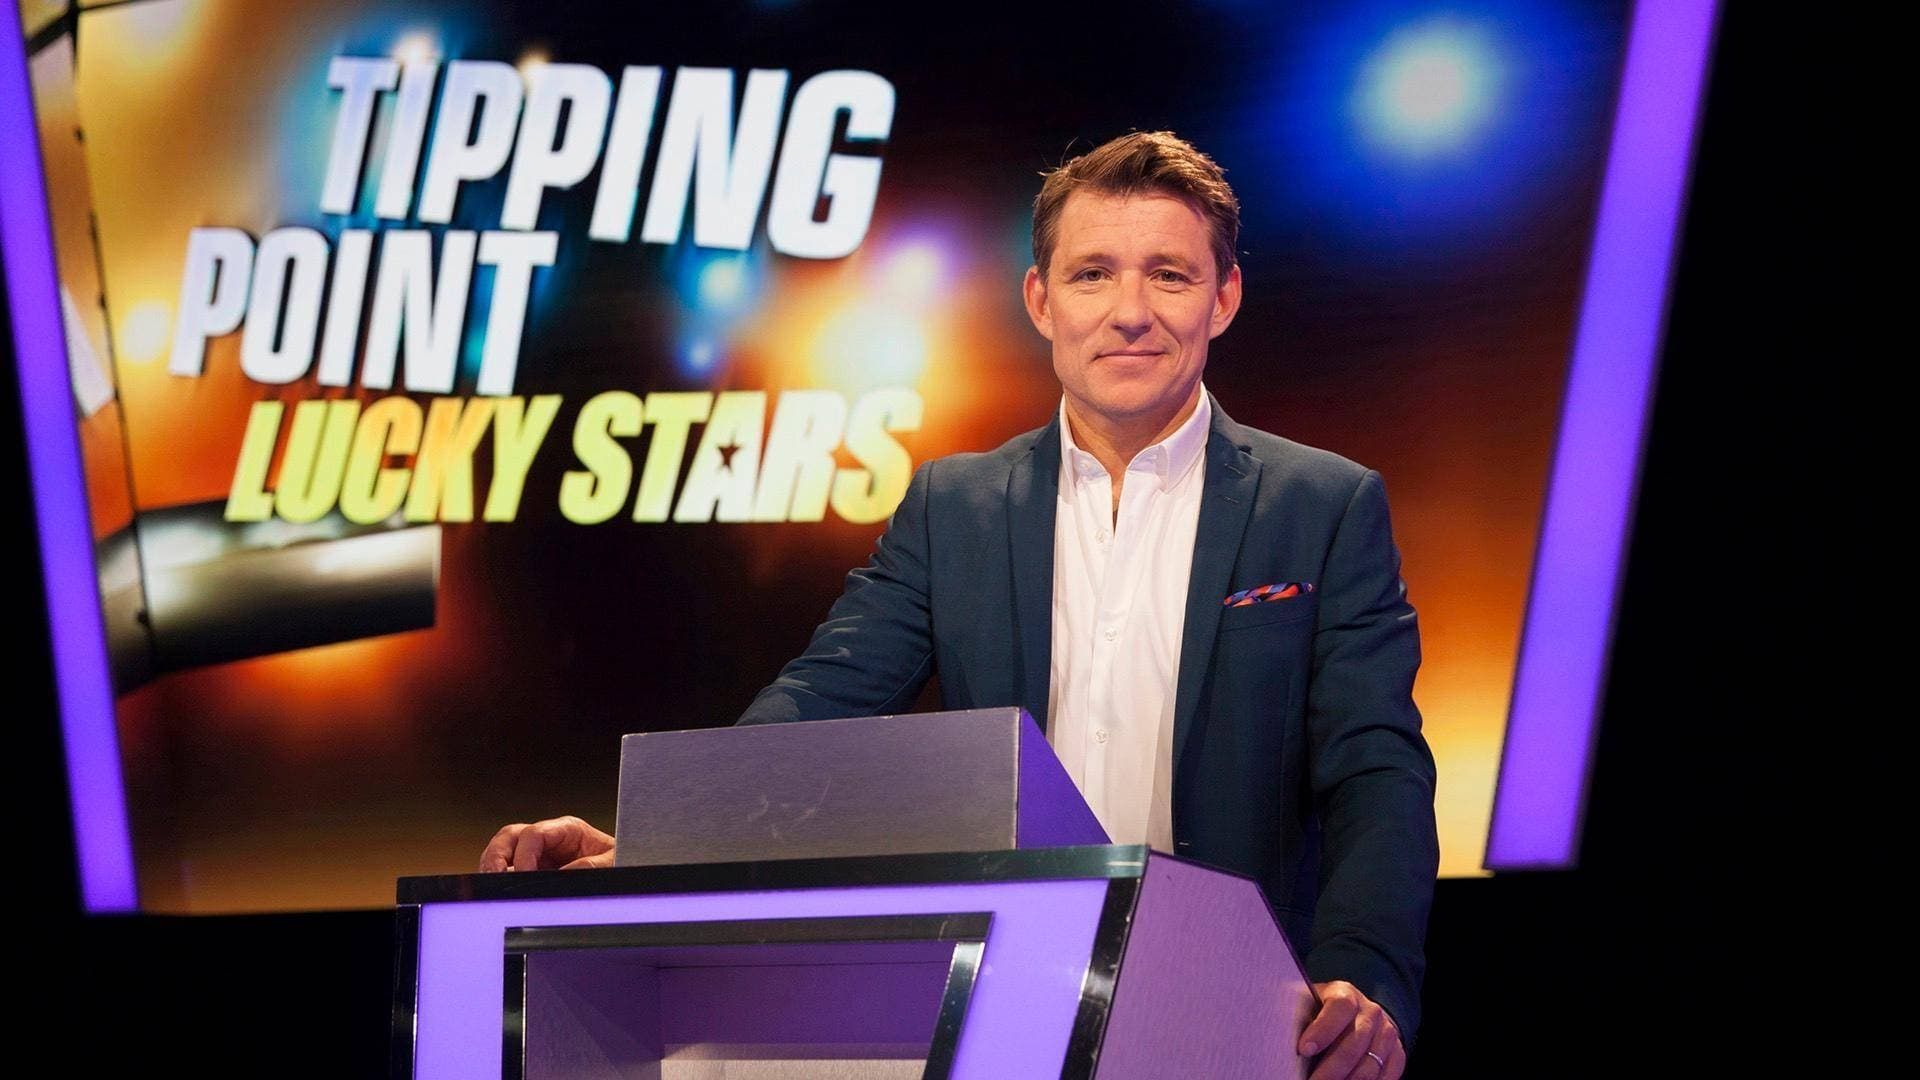 Tipping Point: Lucky Stars background